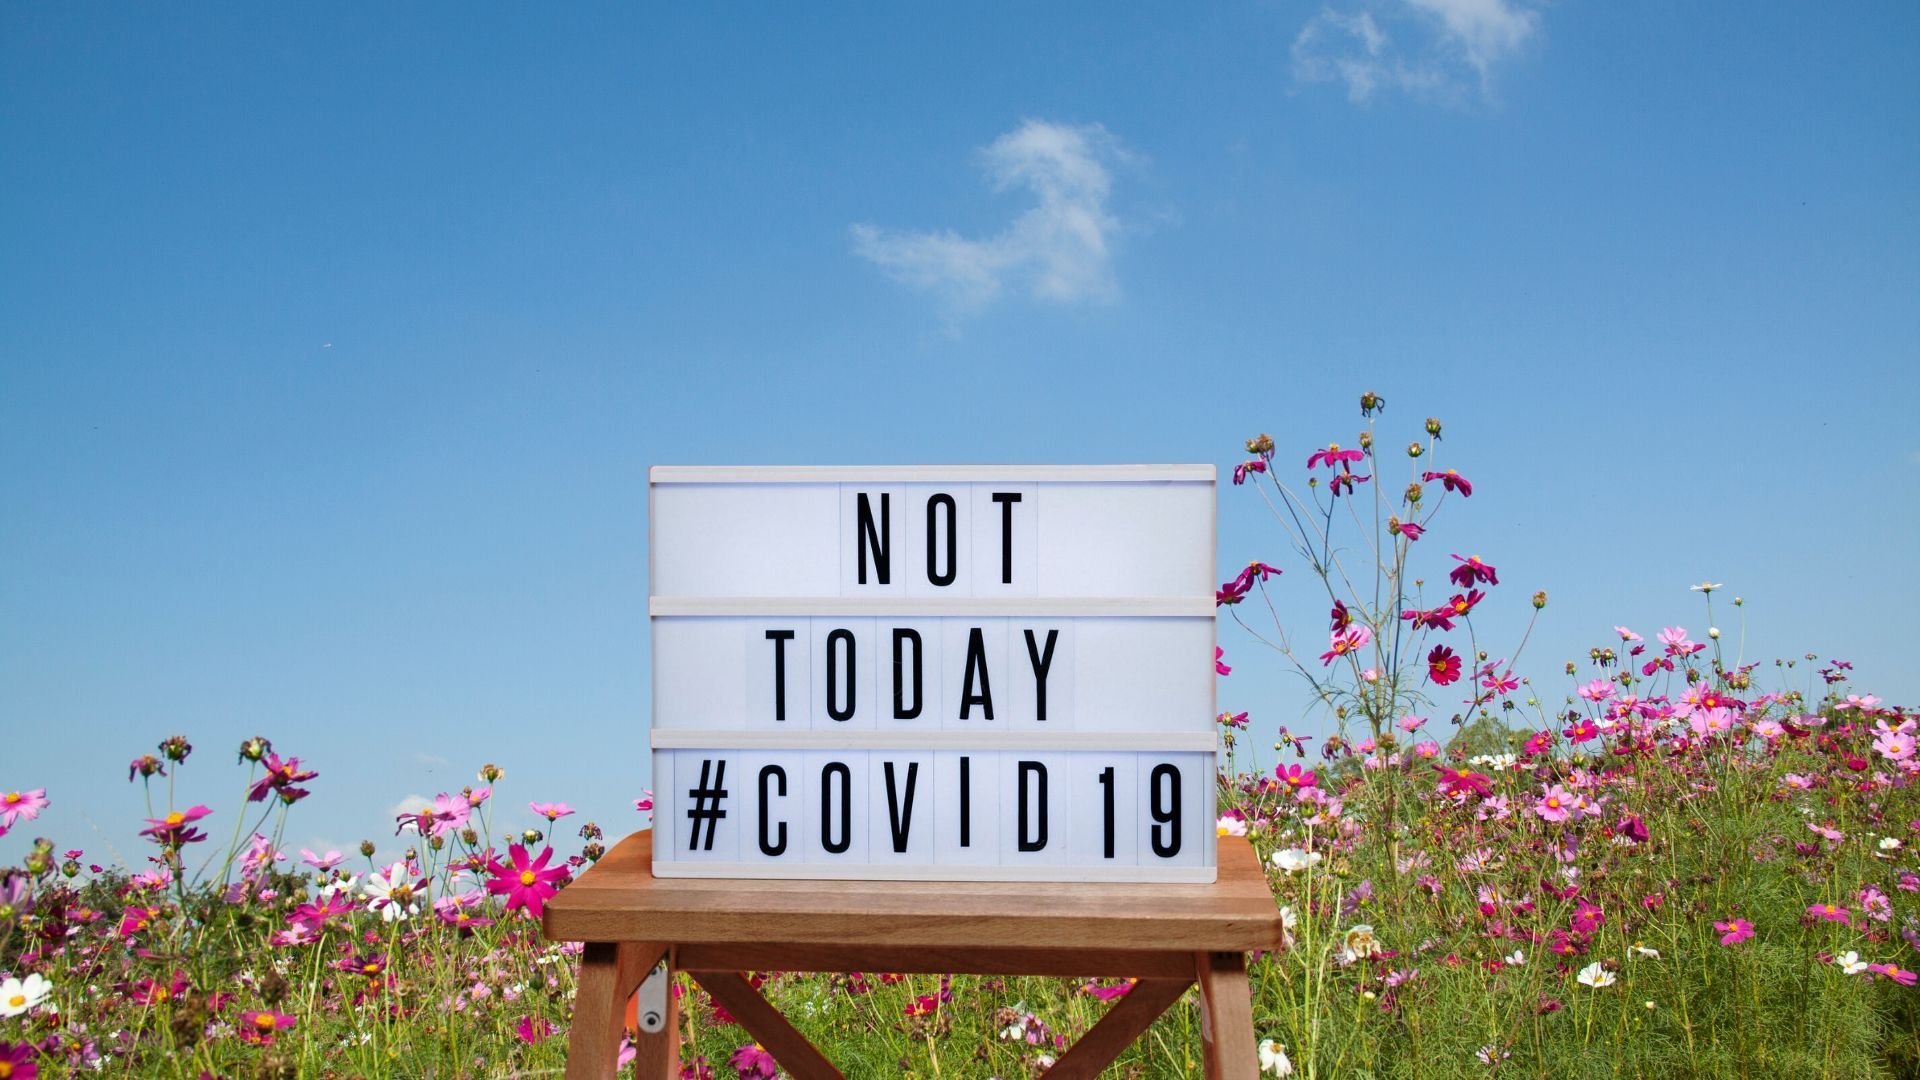 Covid19 mental health and coping